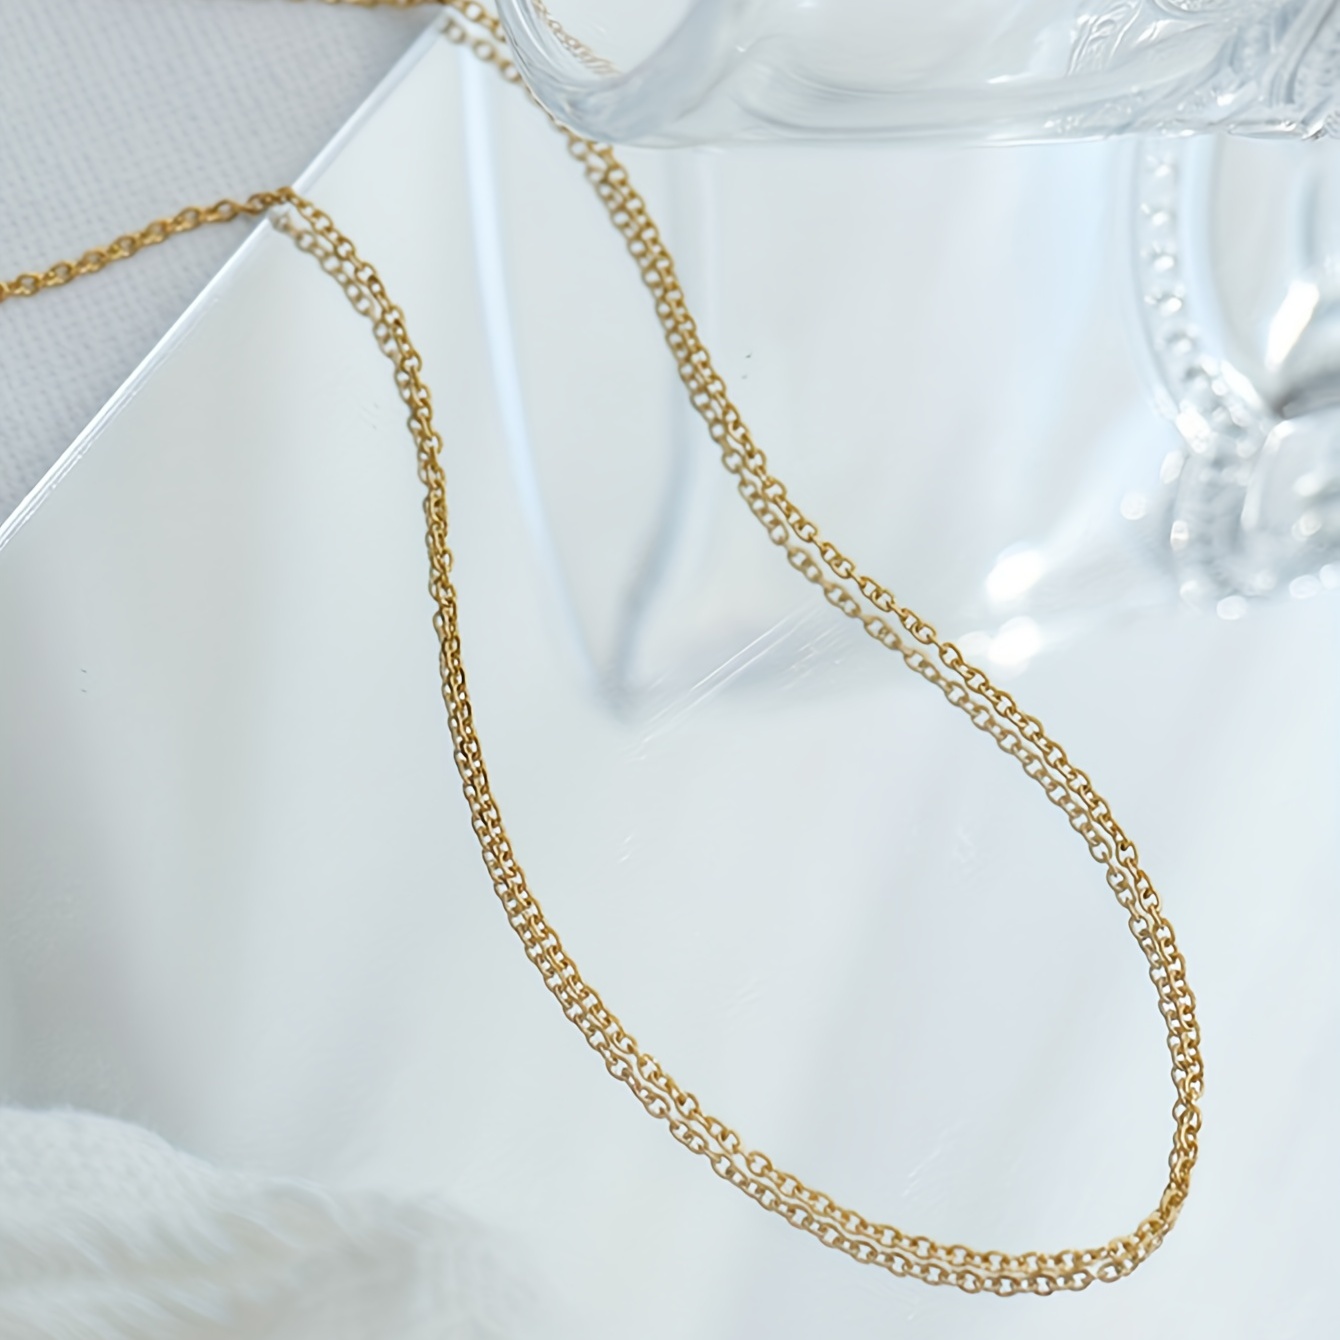 Gold Stainless Steel Rope Chain Necklace Lisa Angel Jewellery Collection Minimal Minimalist Gold